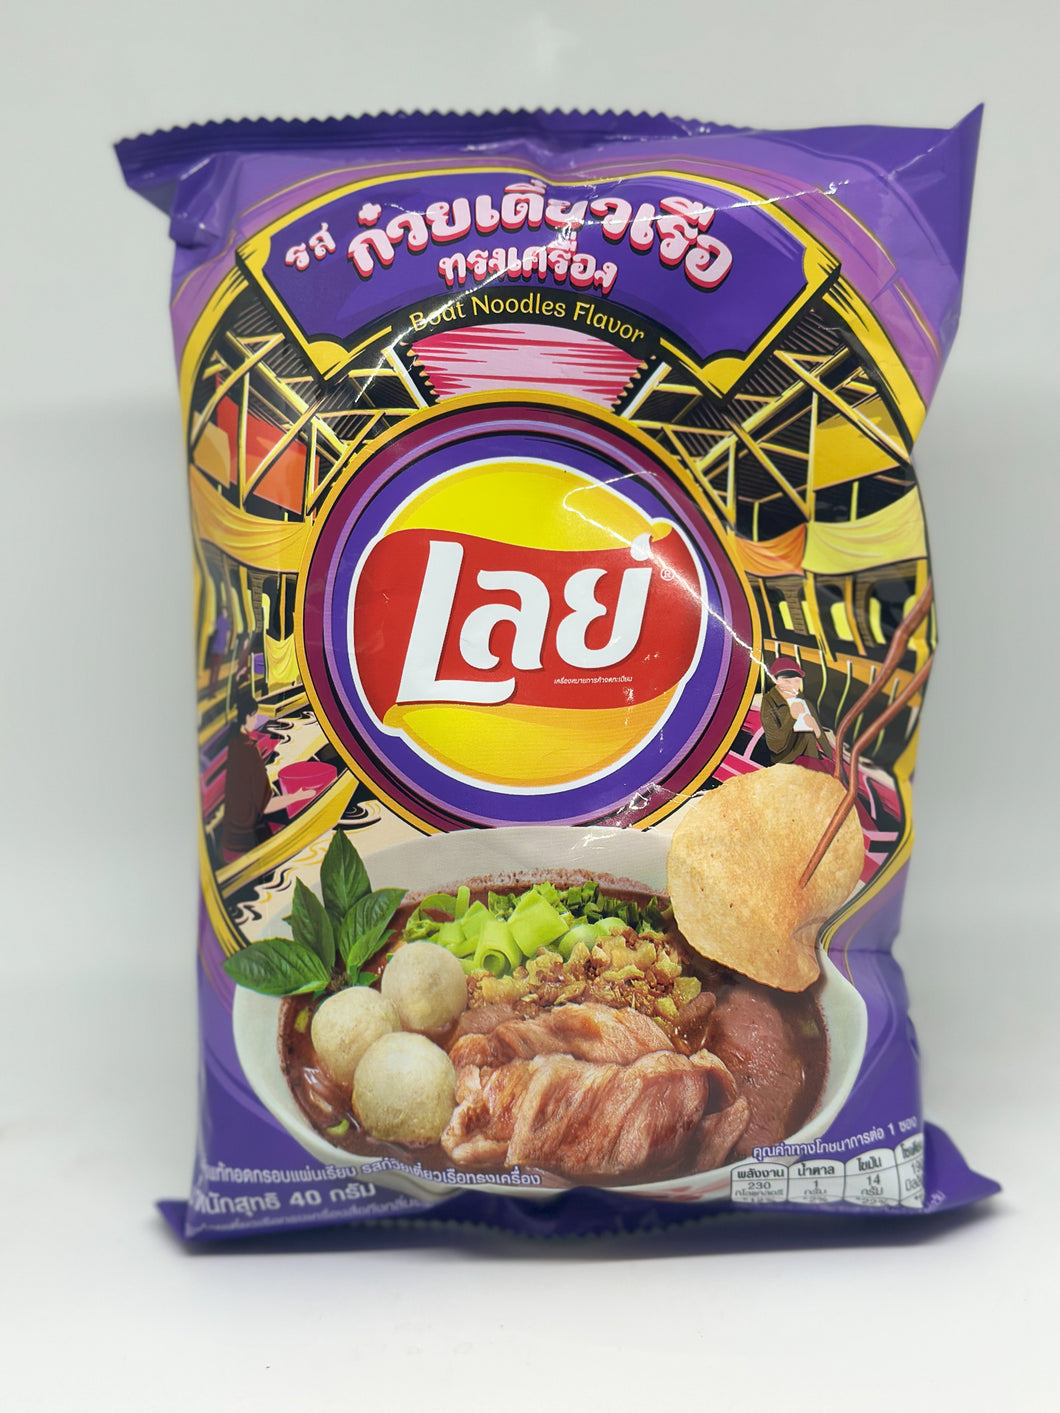 Boat Noodles Flavored Chips by Lays